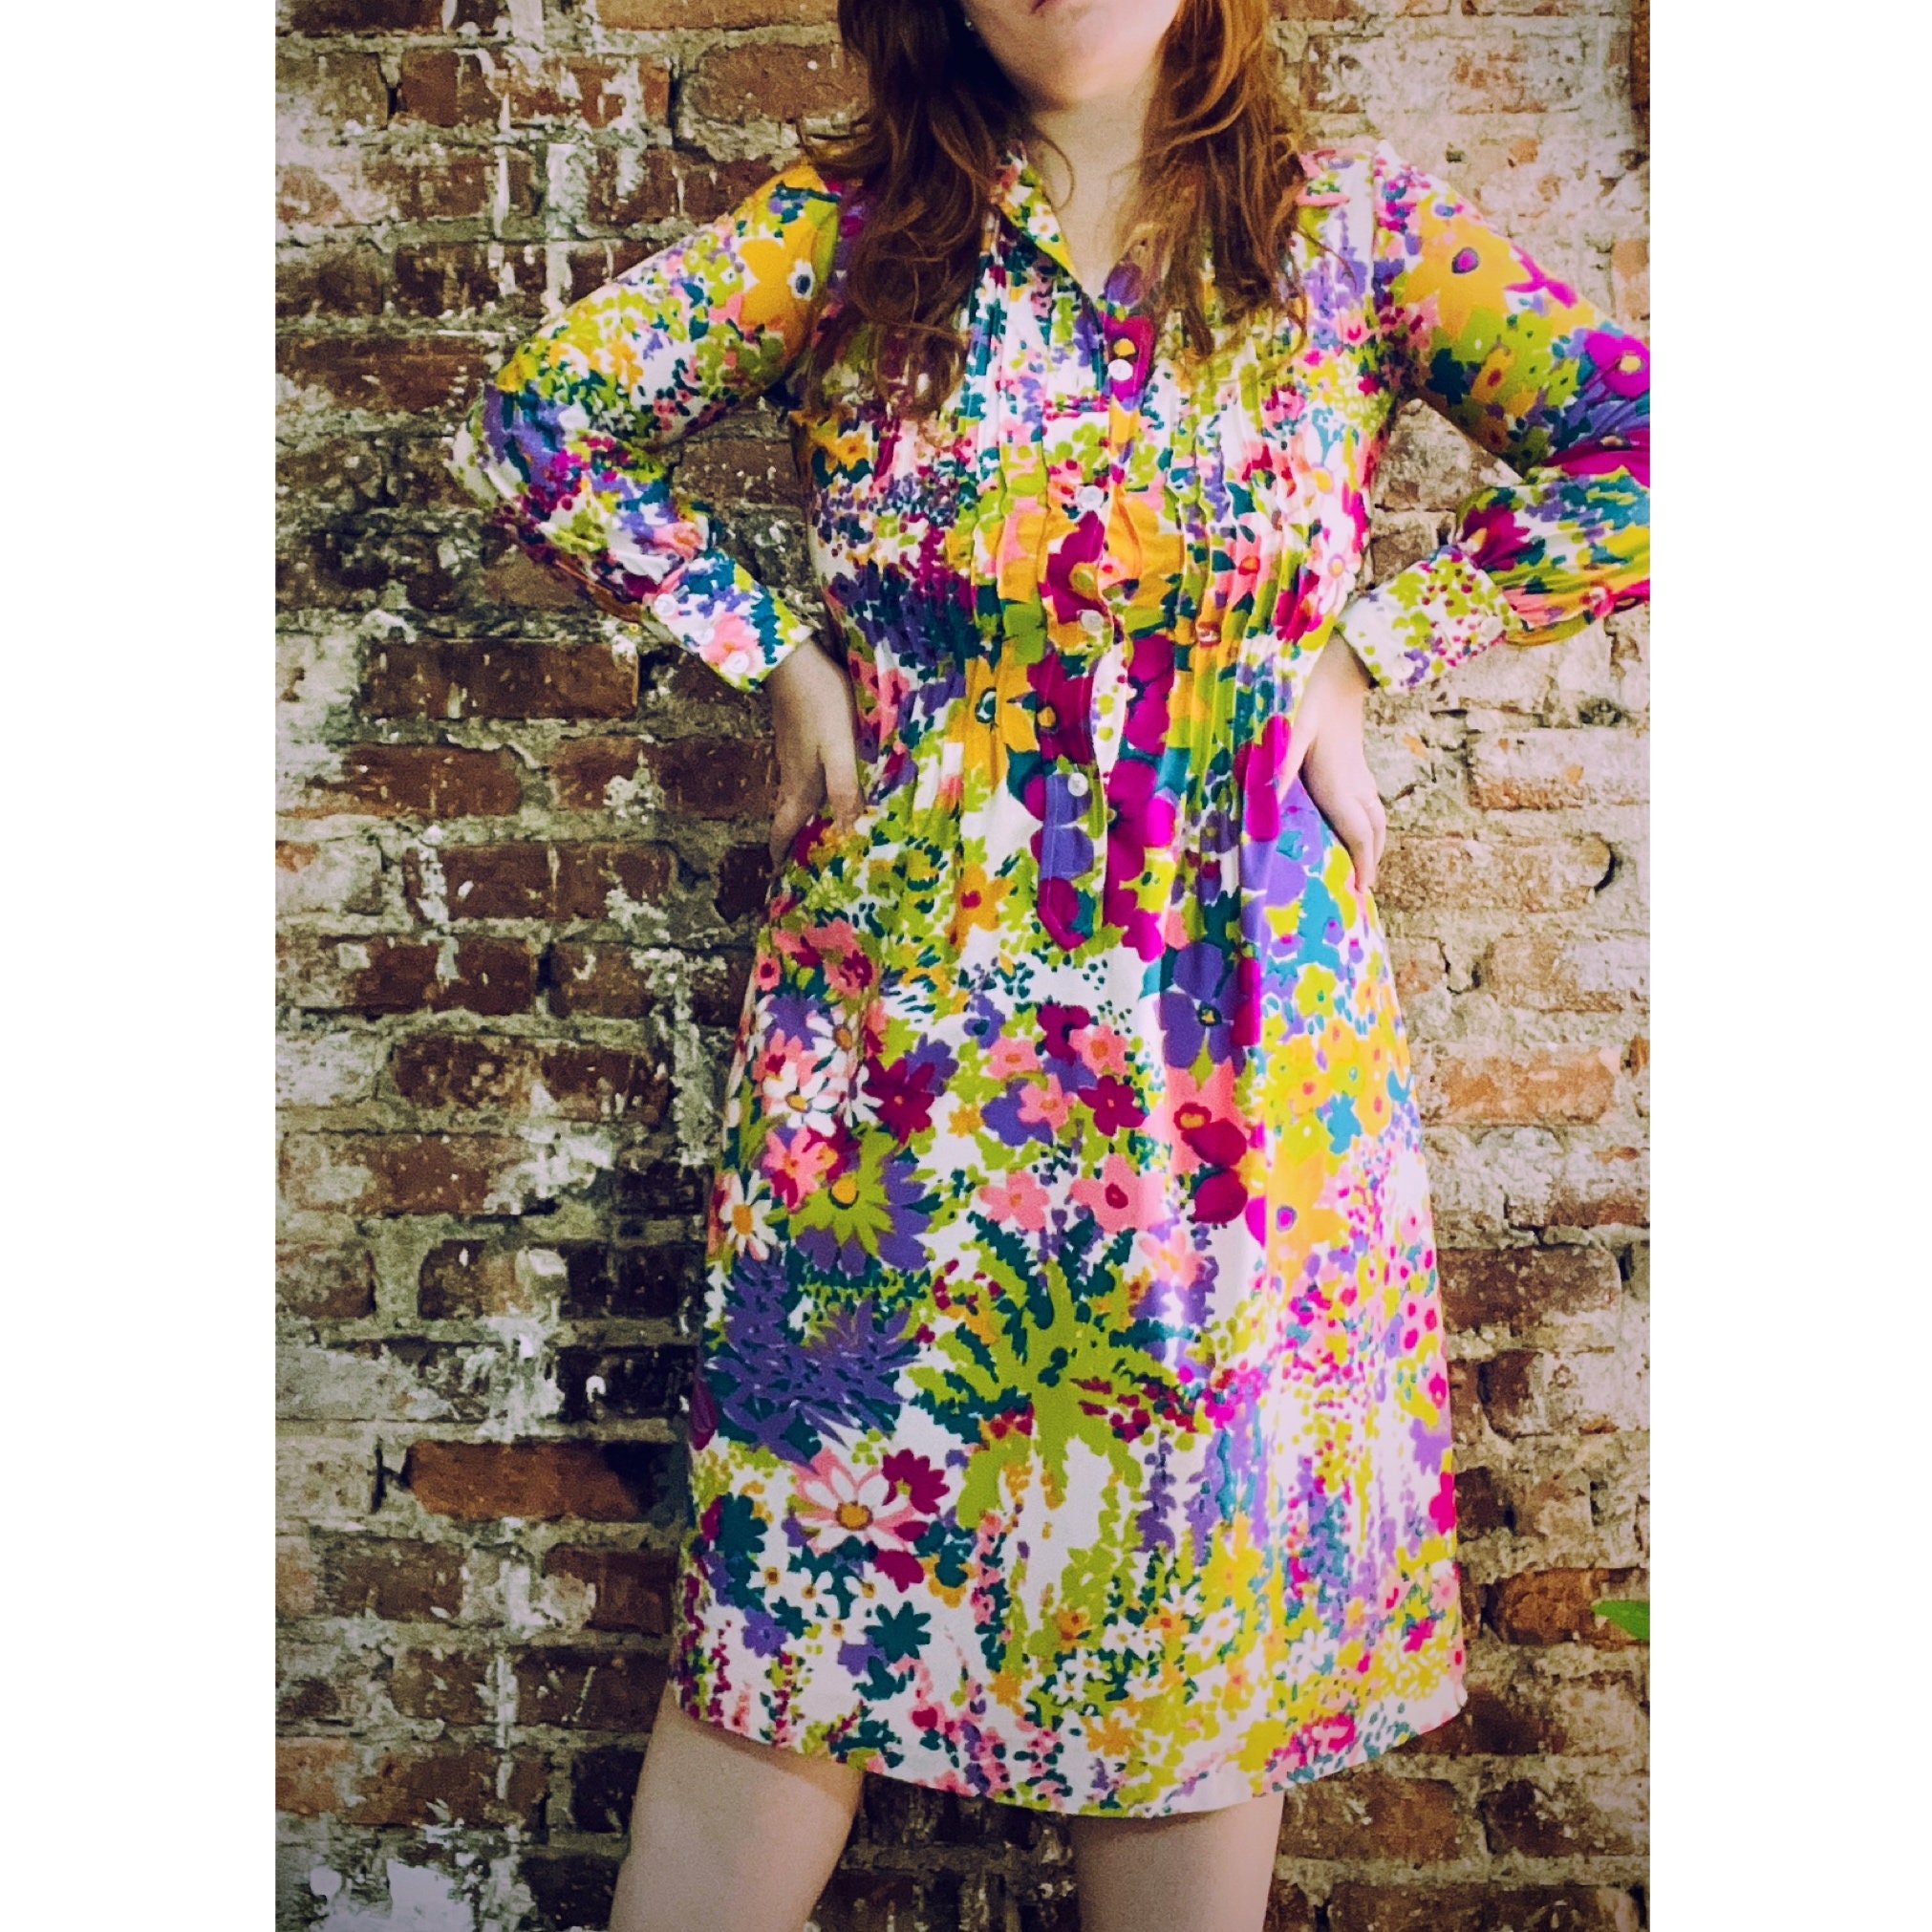 Lord & Taylor 1960's Floral Tunic Dress